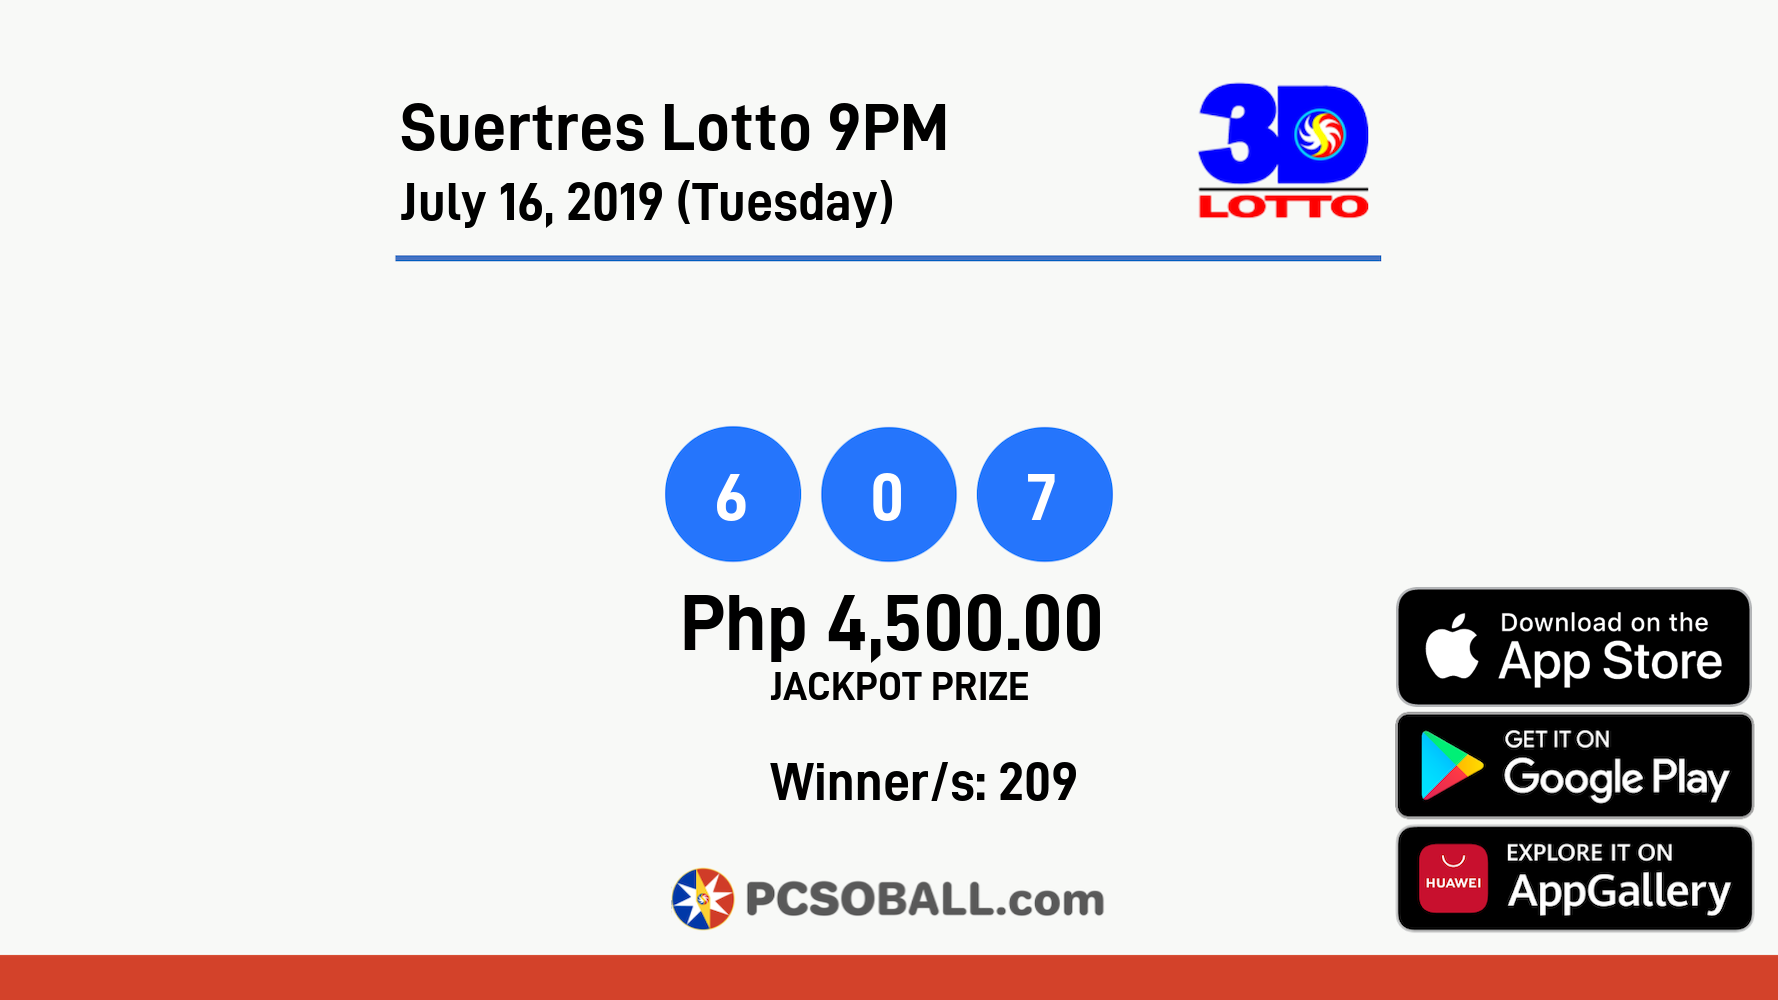 Suertres Lotto 9PM July 16, 2019 (Tuesday) Result